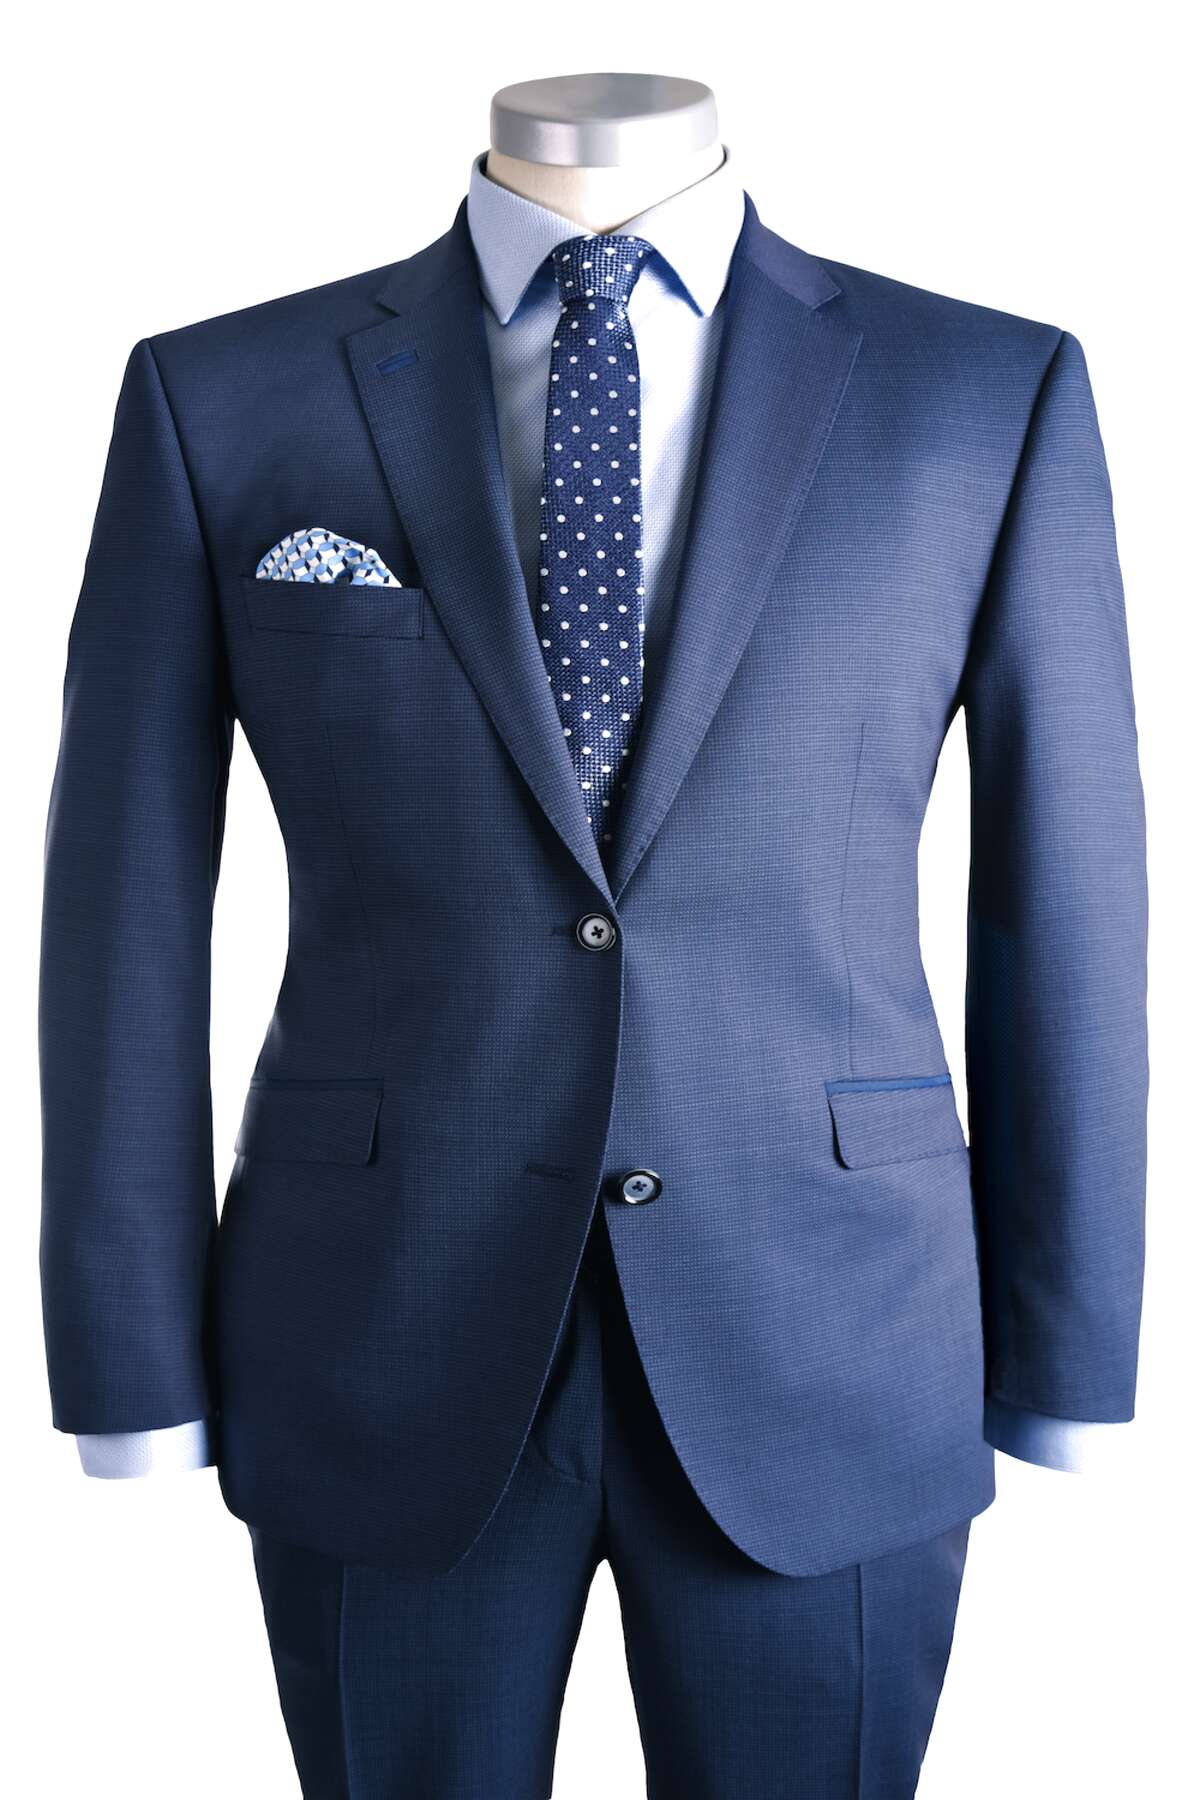 Roy Robson Suits for sale in UK | 62 used Roy Robson Suits